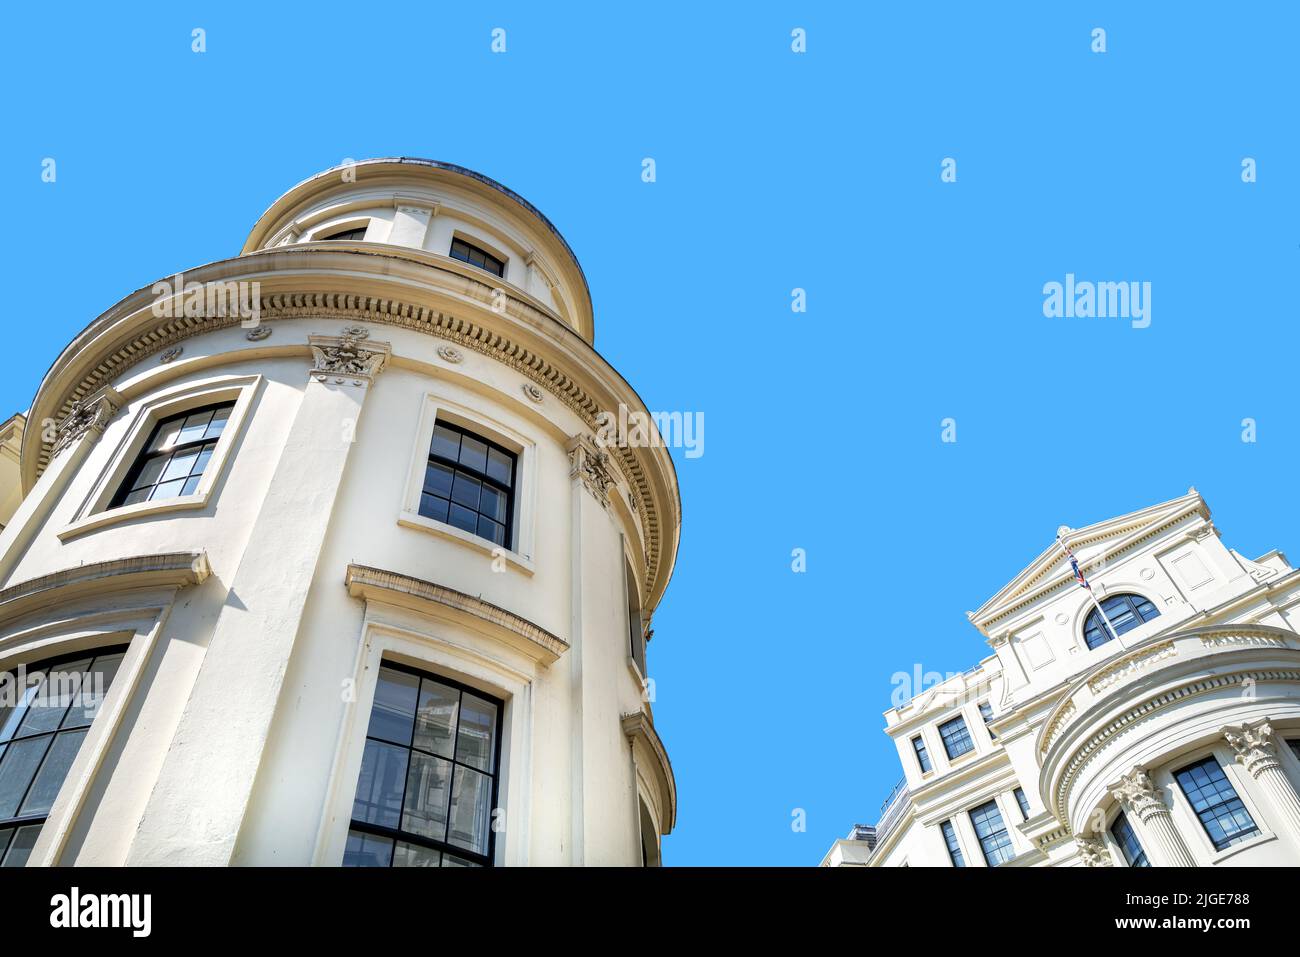 Generic London architecture against blue sky background with space for text. Stock Photo